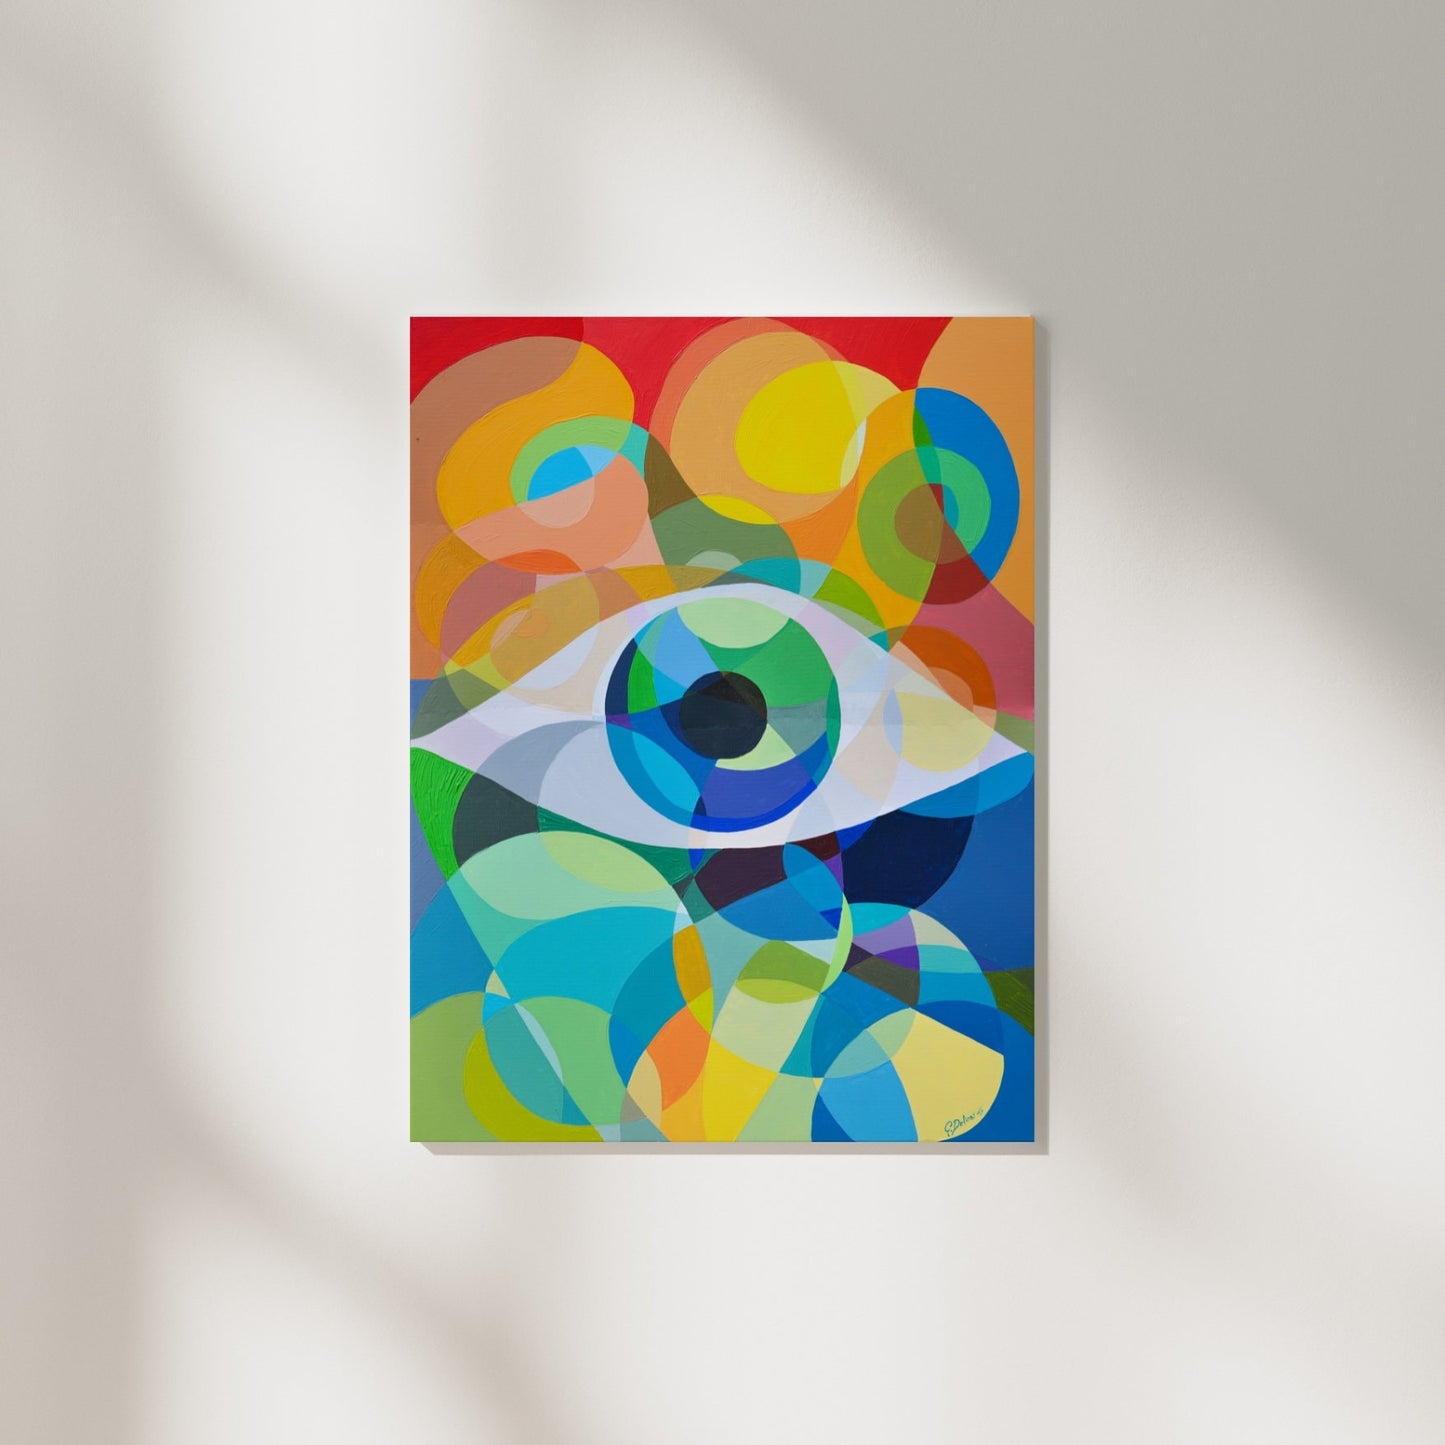 NEW: I See You | Original Painting by Gasper Dolinar